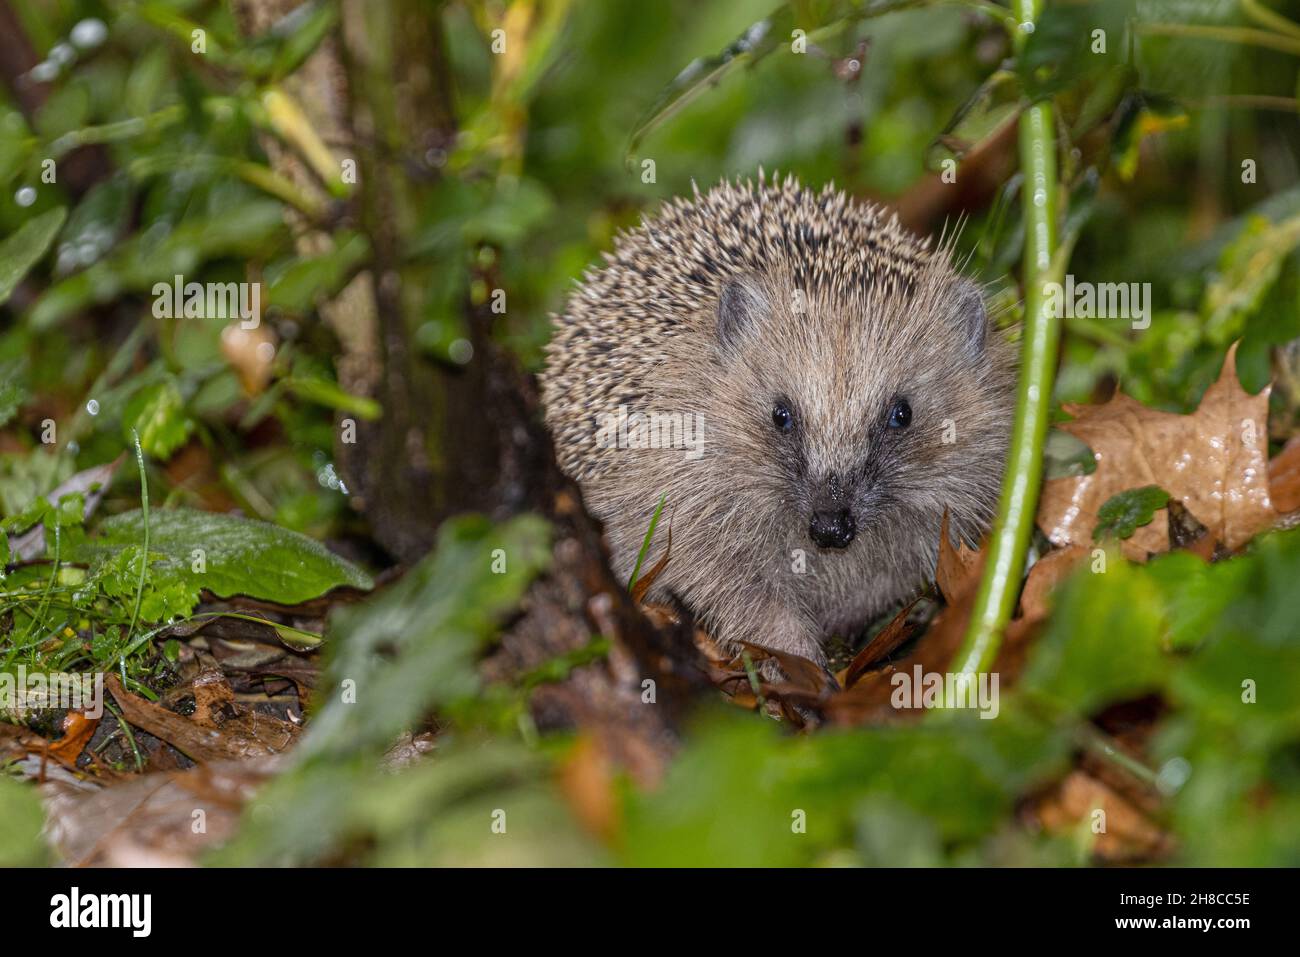 Western hedgehog, European hedgehog (Erinaceus europaeus), walking through a wet with dew meadow with fallen leaves in late autumn, front view, Stock Photo